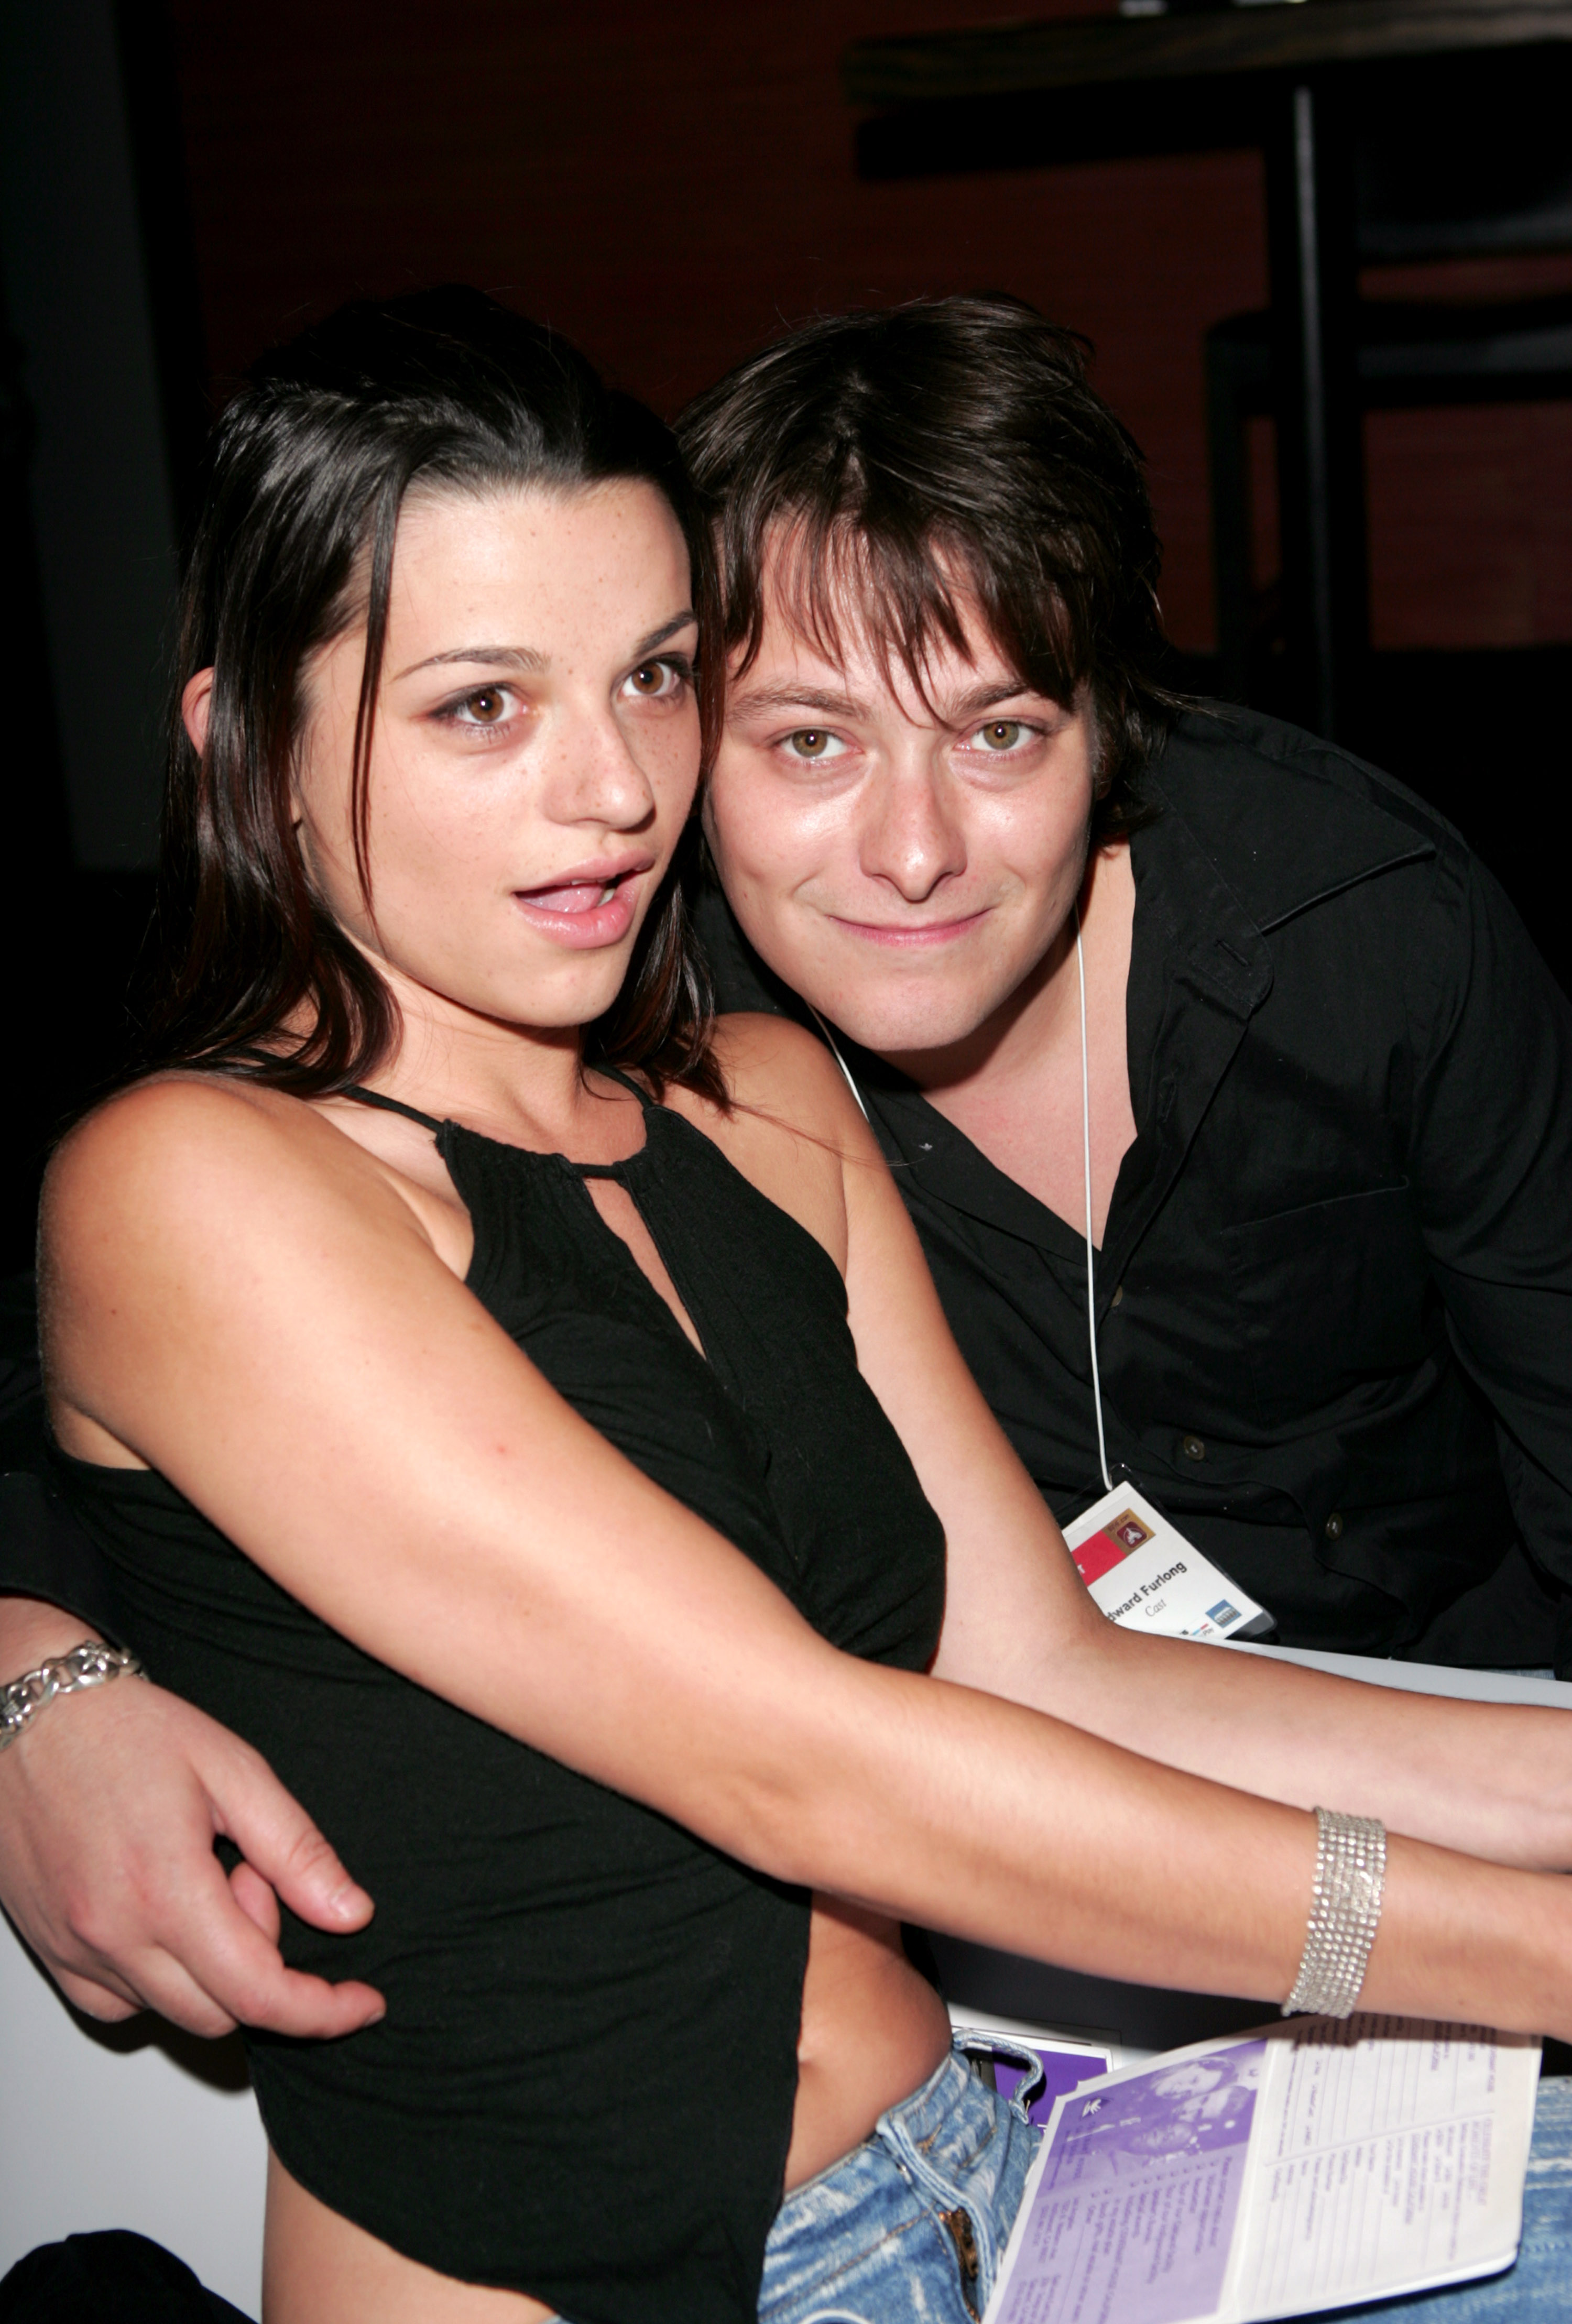 Rachel Bella and Edward Furlong at "The Crow: Wicked Prayer" VIP press screening benefiting Covenant House in Hollywood, California on July 18, 2005 | Source: Getty Images